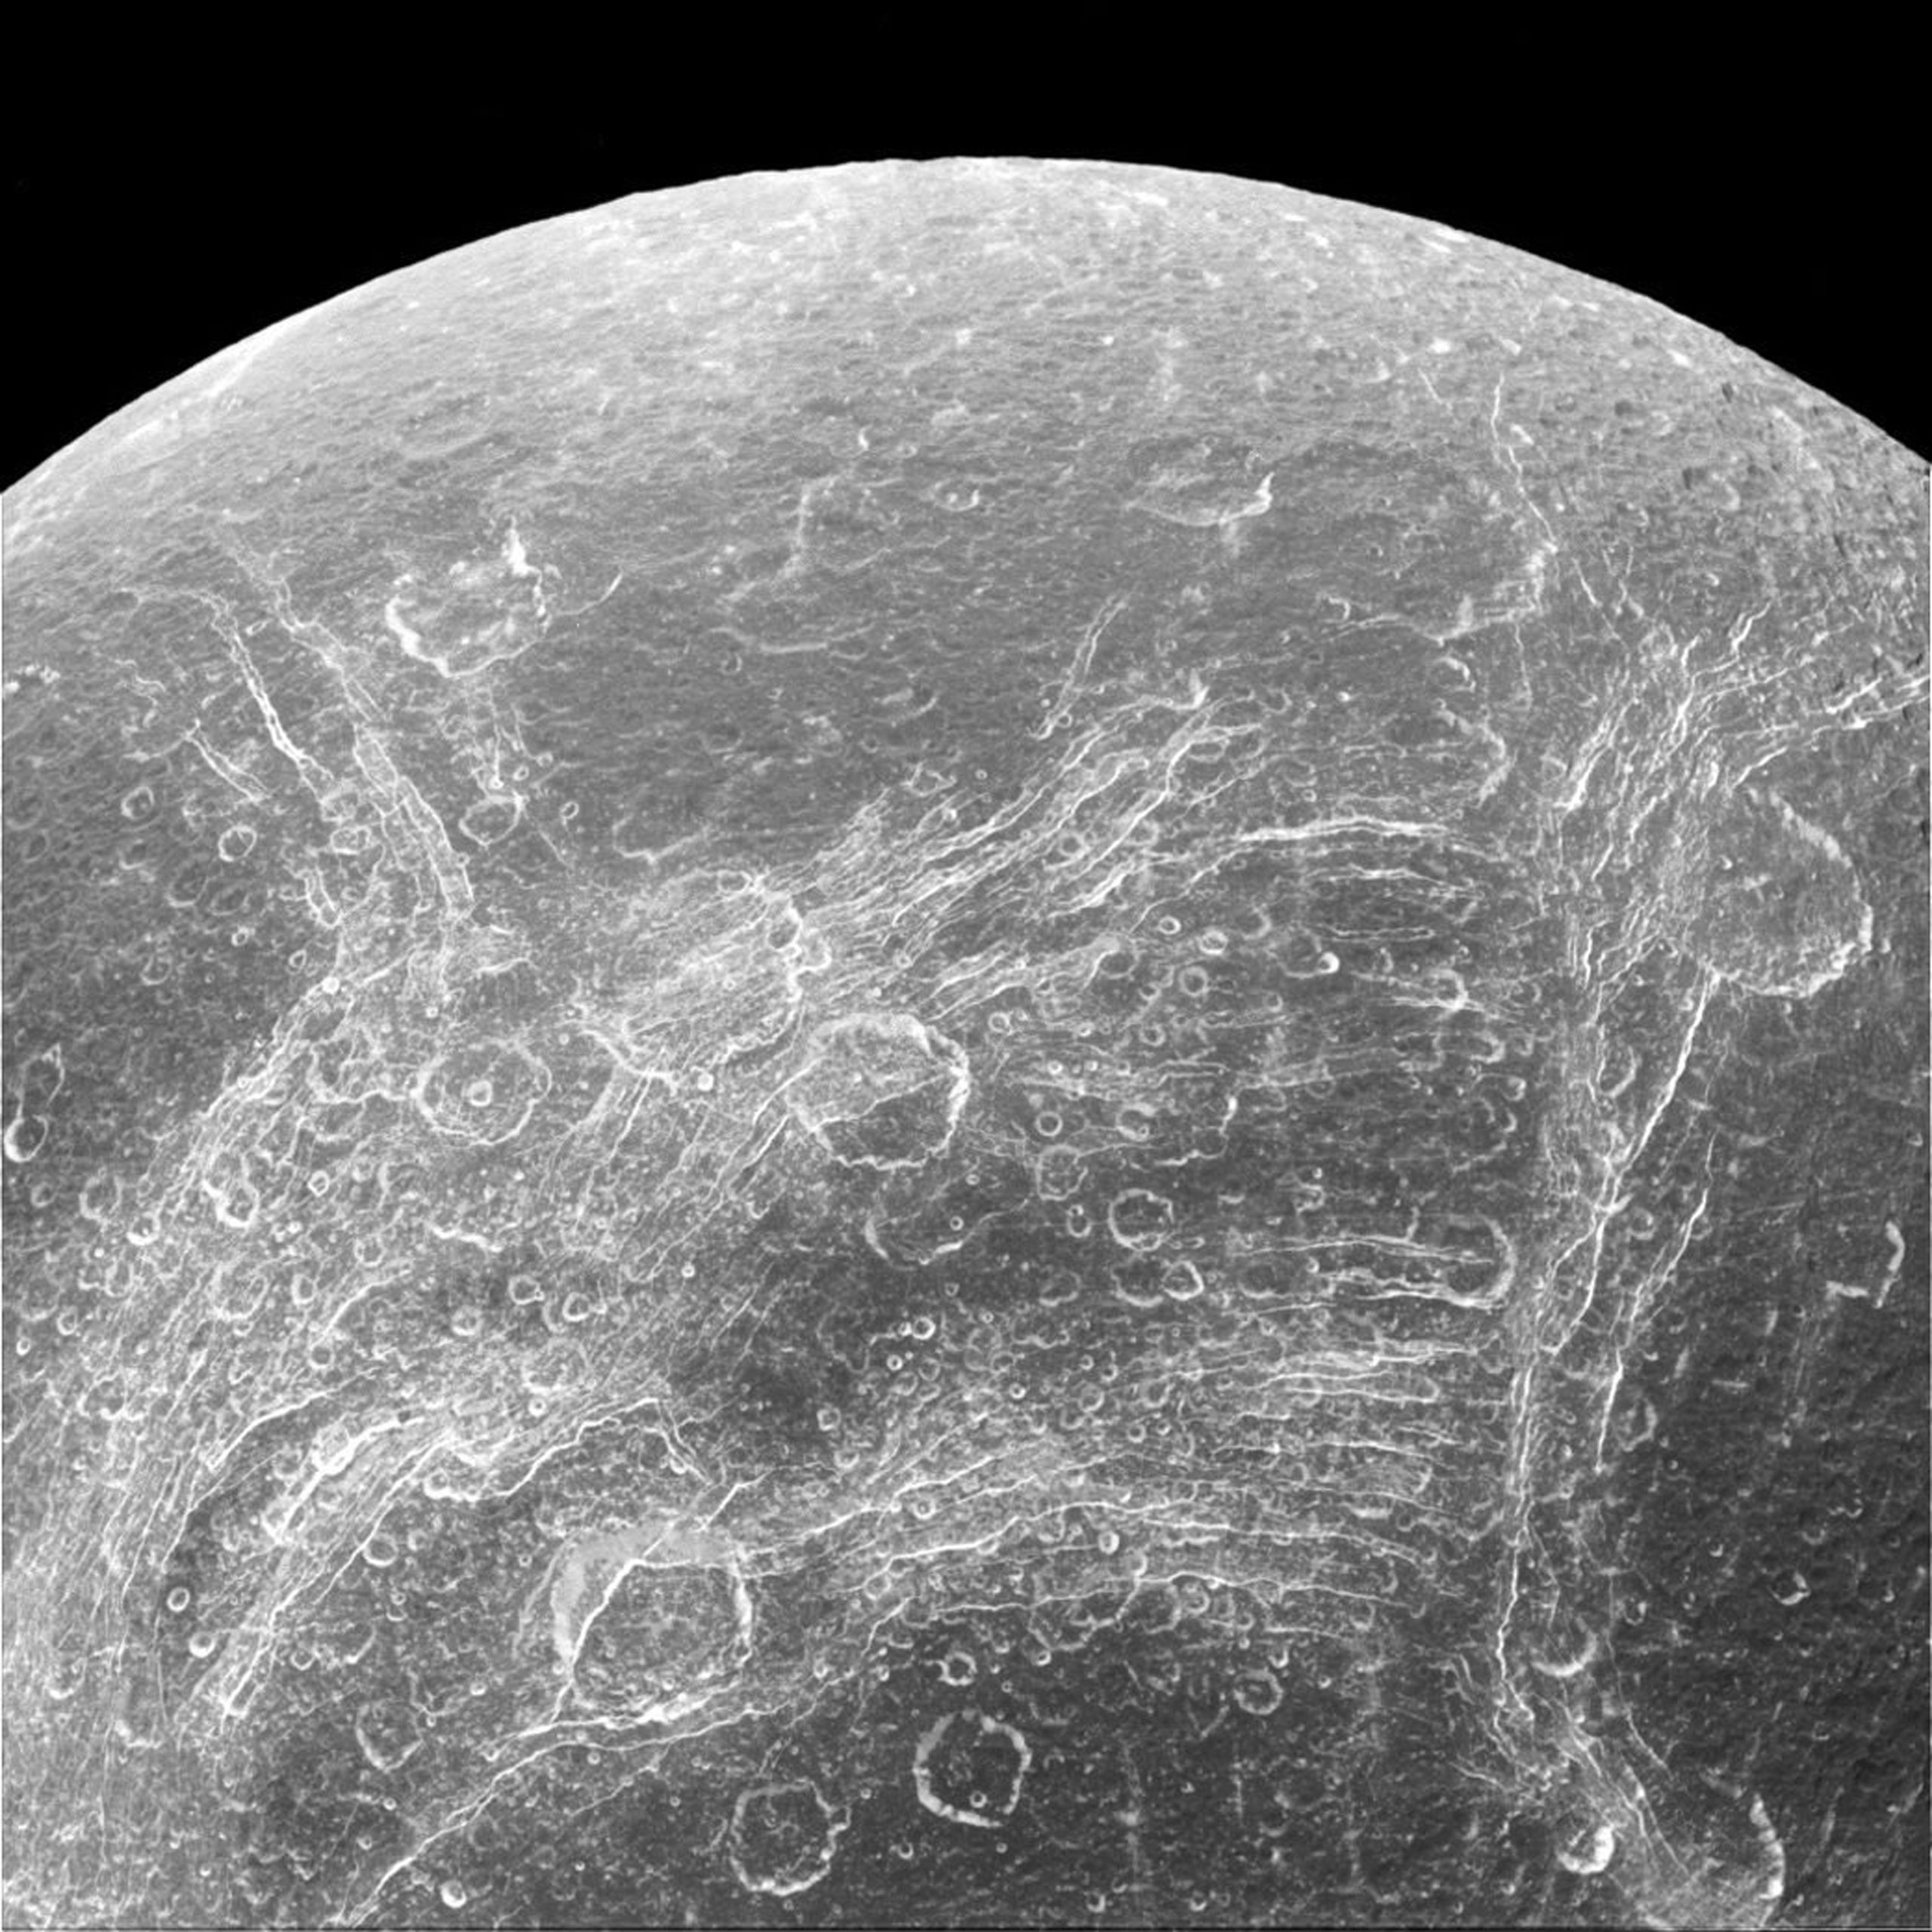 A visible light image of Saturn's moon Dione captured with the Cassini spacecraft narrow-angle camera on April 11, 2015 and released on Aug. 17, 2015. (NASA/JPL-Caltech/Space Science Institute/EPA)